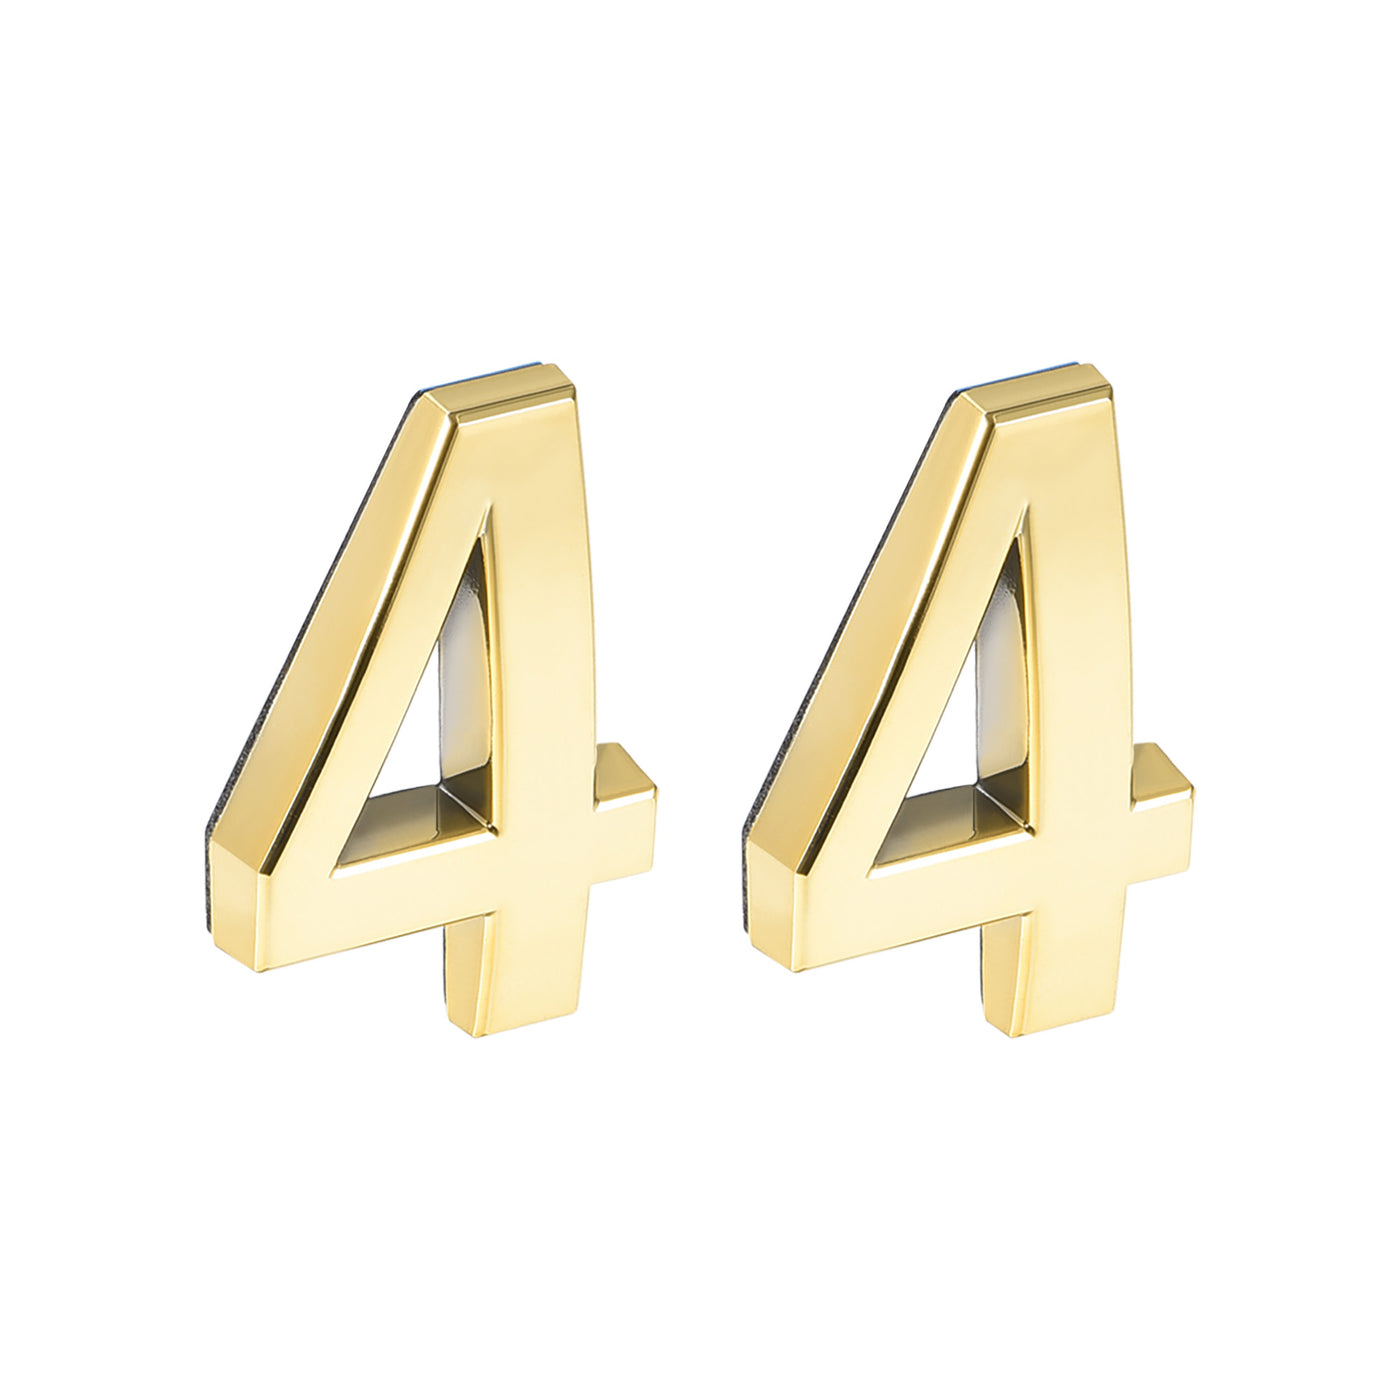 Uxcell Uxcell Self Adhesive House Number, 2.76 Inch ABS Plastic Number 3 for House Hotel Mailbox Address Sign Gold Tone 2 Pcs